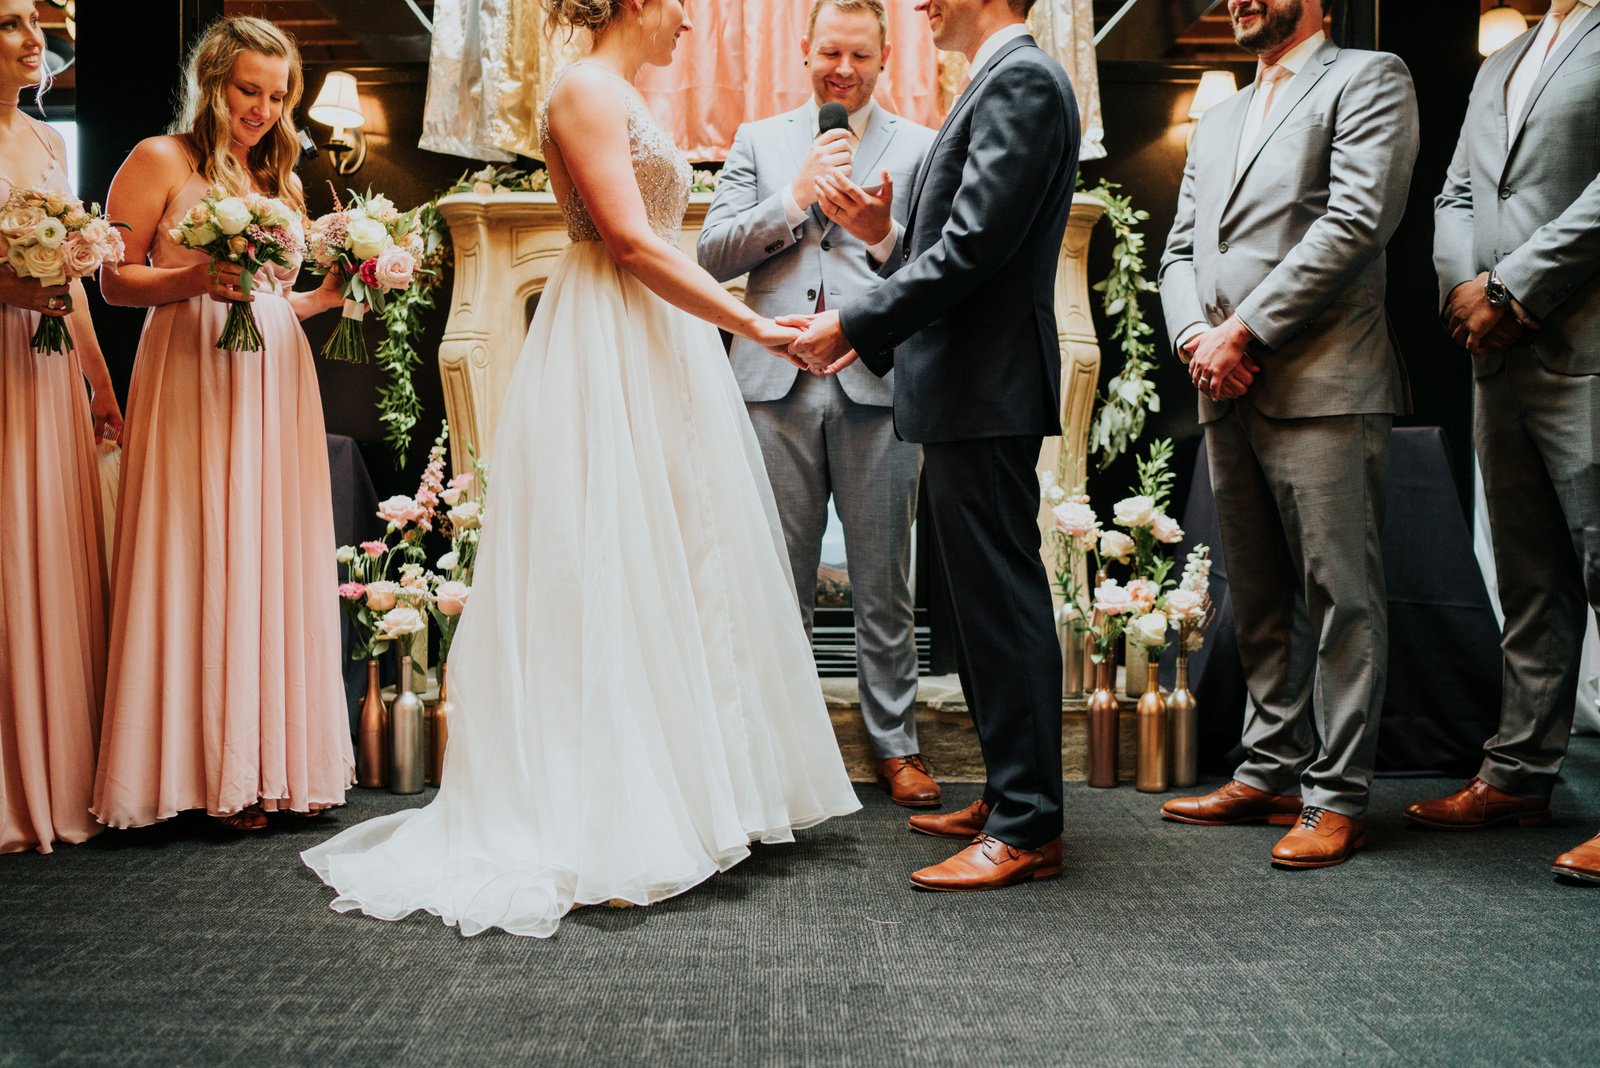 JS Weddings and Events, a Grand Rapids Wedding Planner and Floral Designer. A Moody Summer Romantic Wedding in Downtown Grand Rapids.